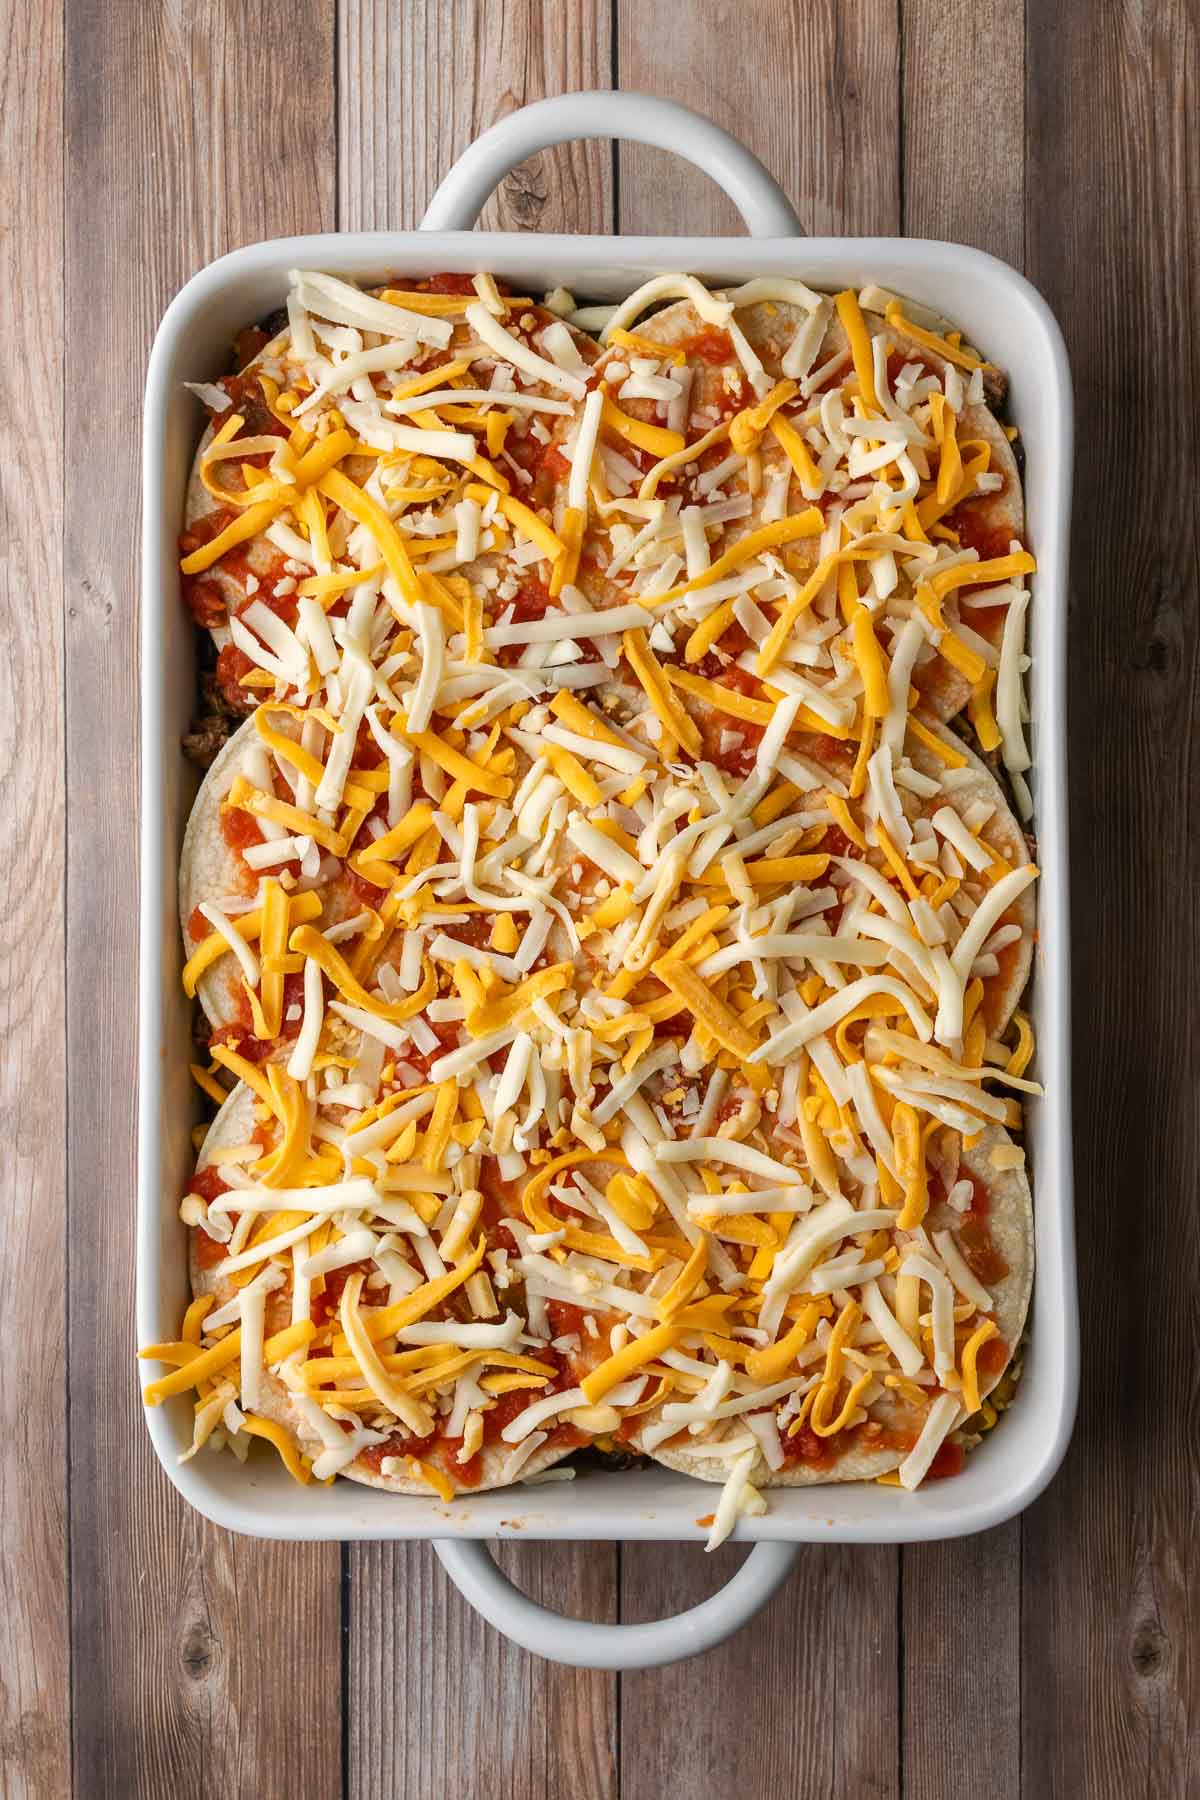 Unbaked tortilla lasagna topped with lots of shredded Mexican blend cheese.